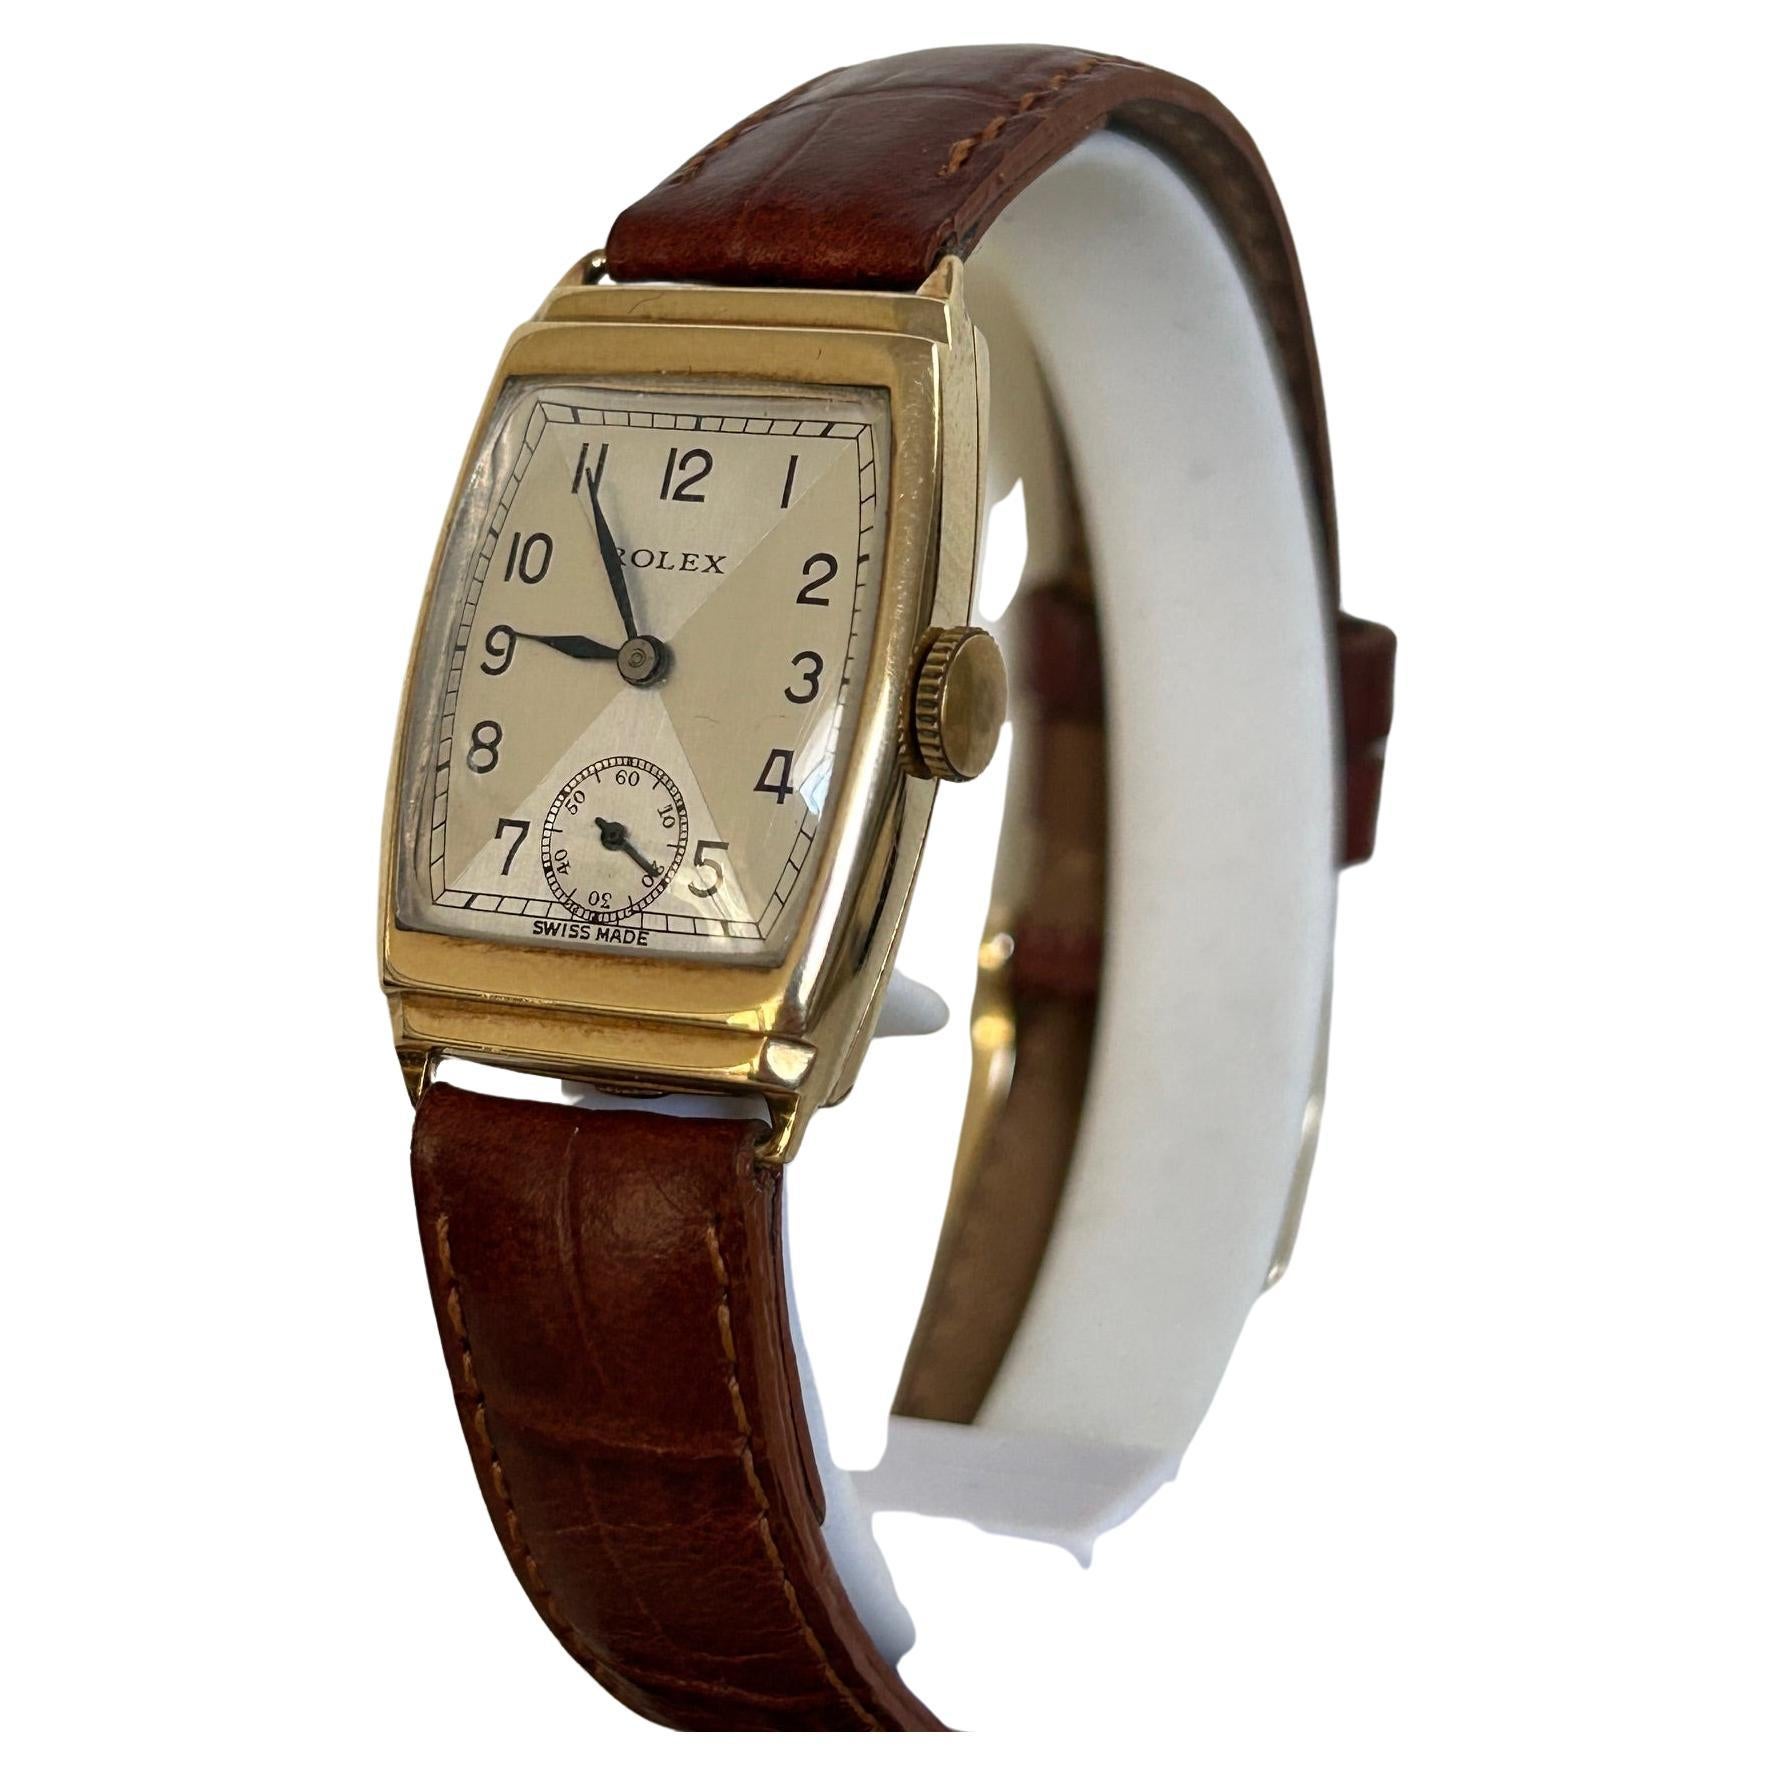 Our wonderful vintage Rolex features a 9k yellow gold stepped tonneau shaped case with manual wind 15 jewel movement. Notably, this example has a very attractive art deco style dial with sub seconds and blued hands, and is presented in oustanding